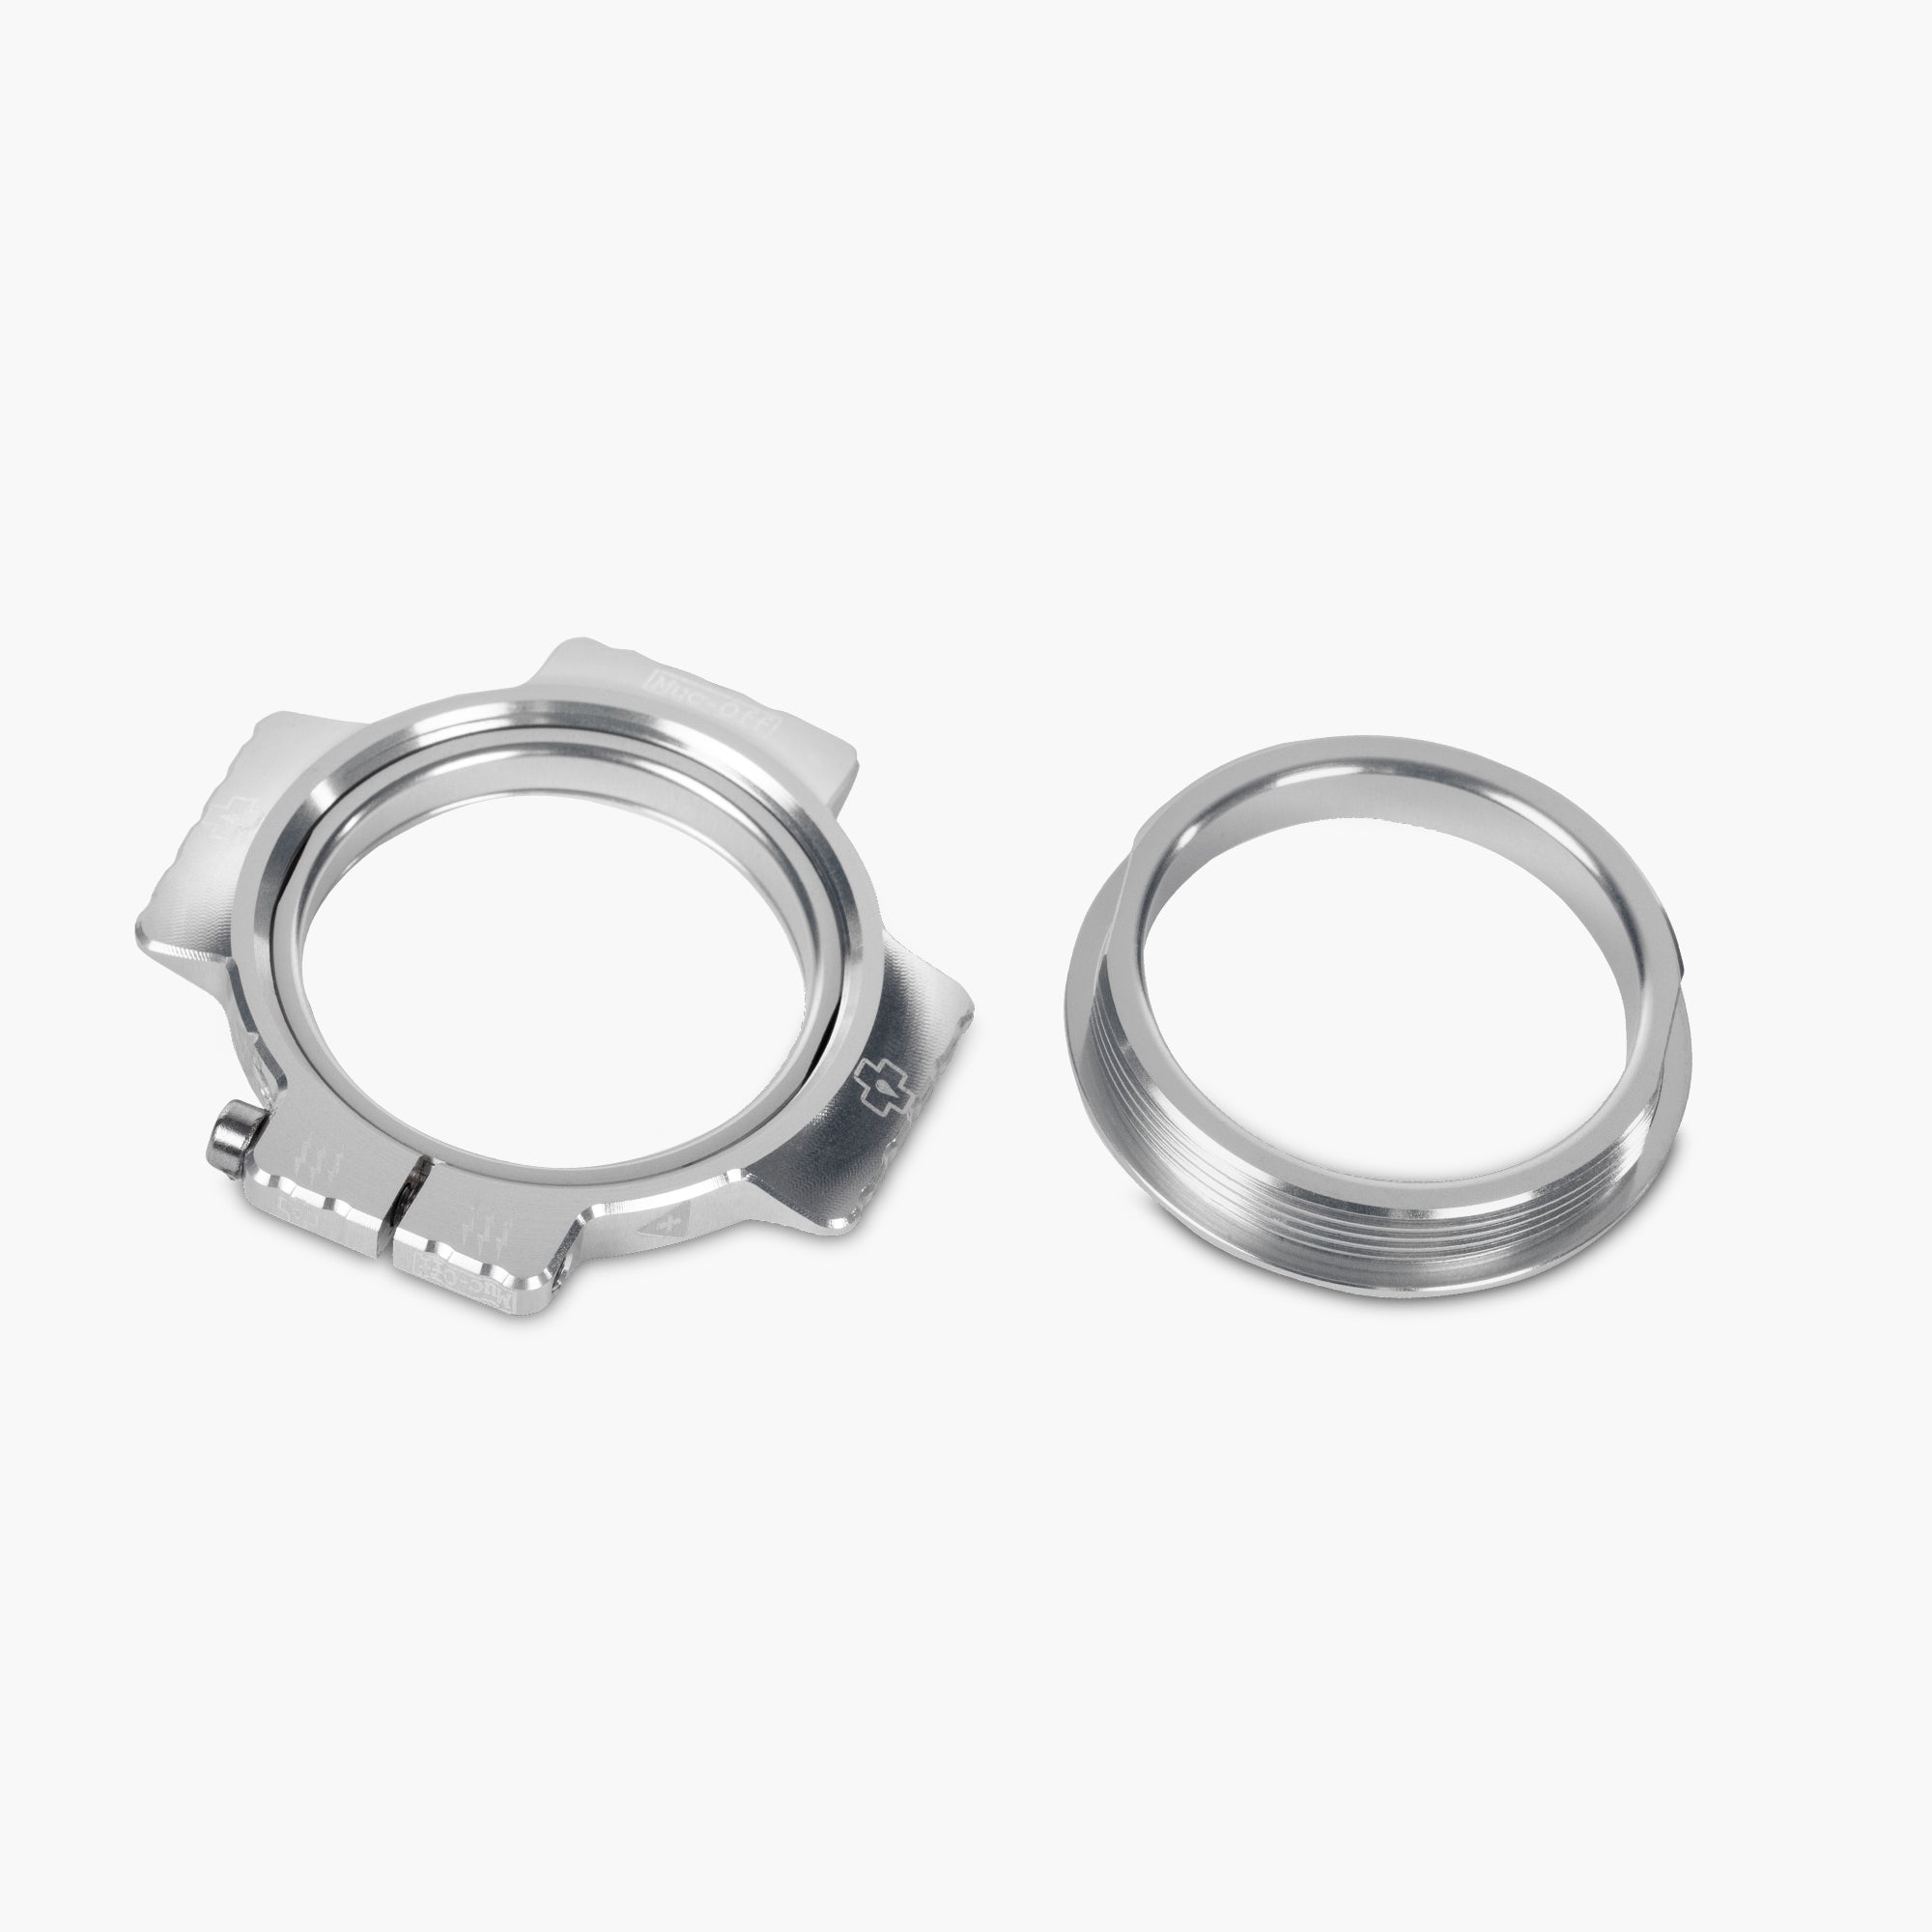 Photos - Bike Accessories Ring Crank Preload  Clearance Colours Silver 